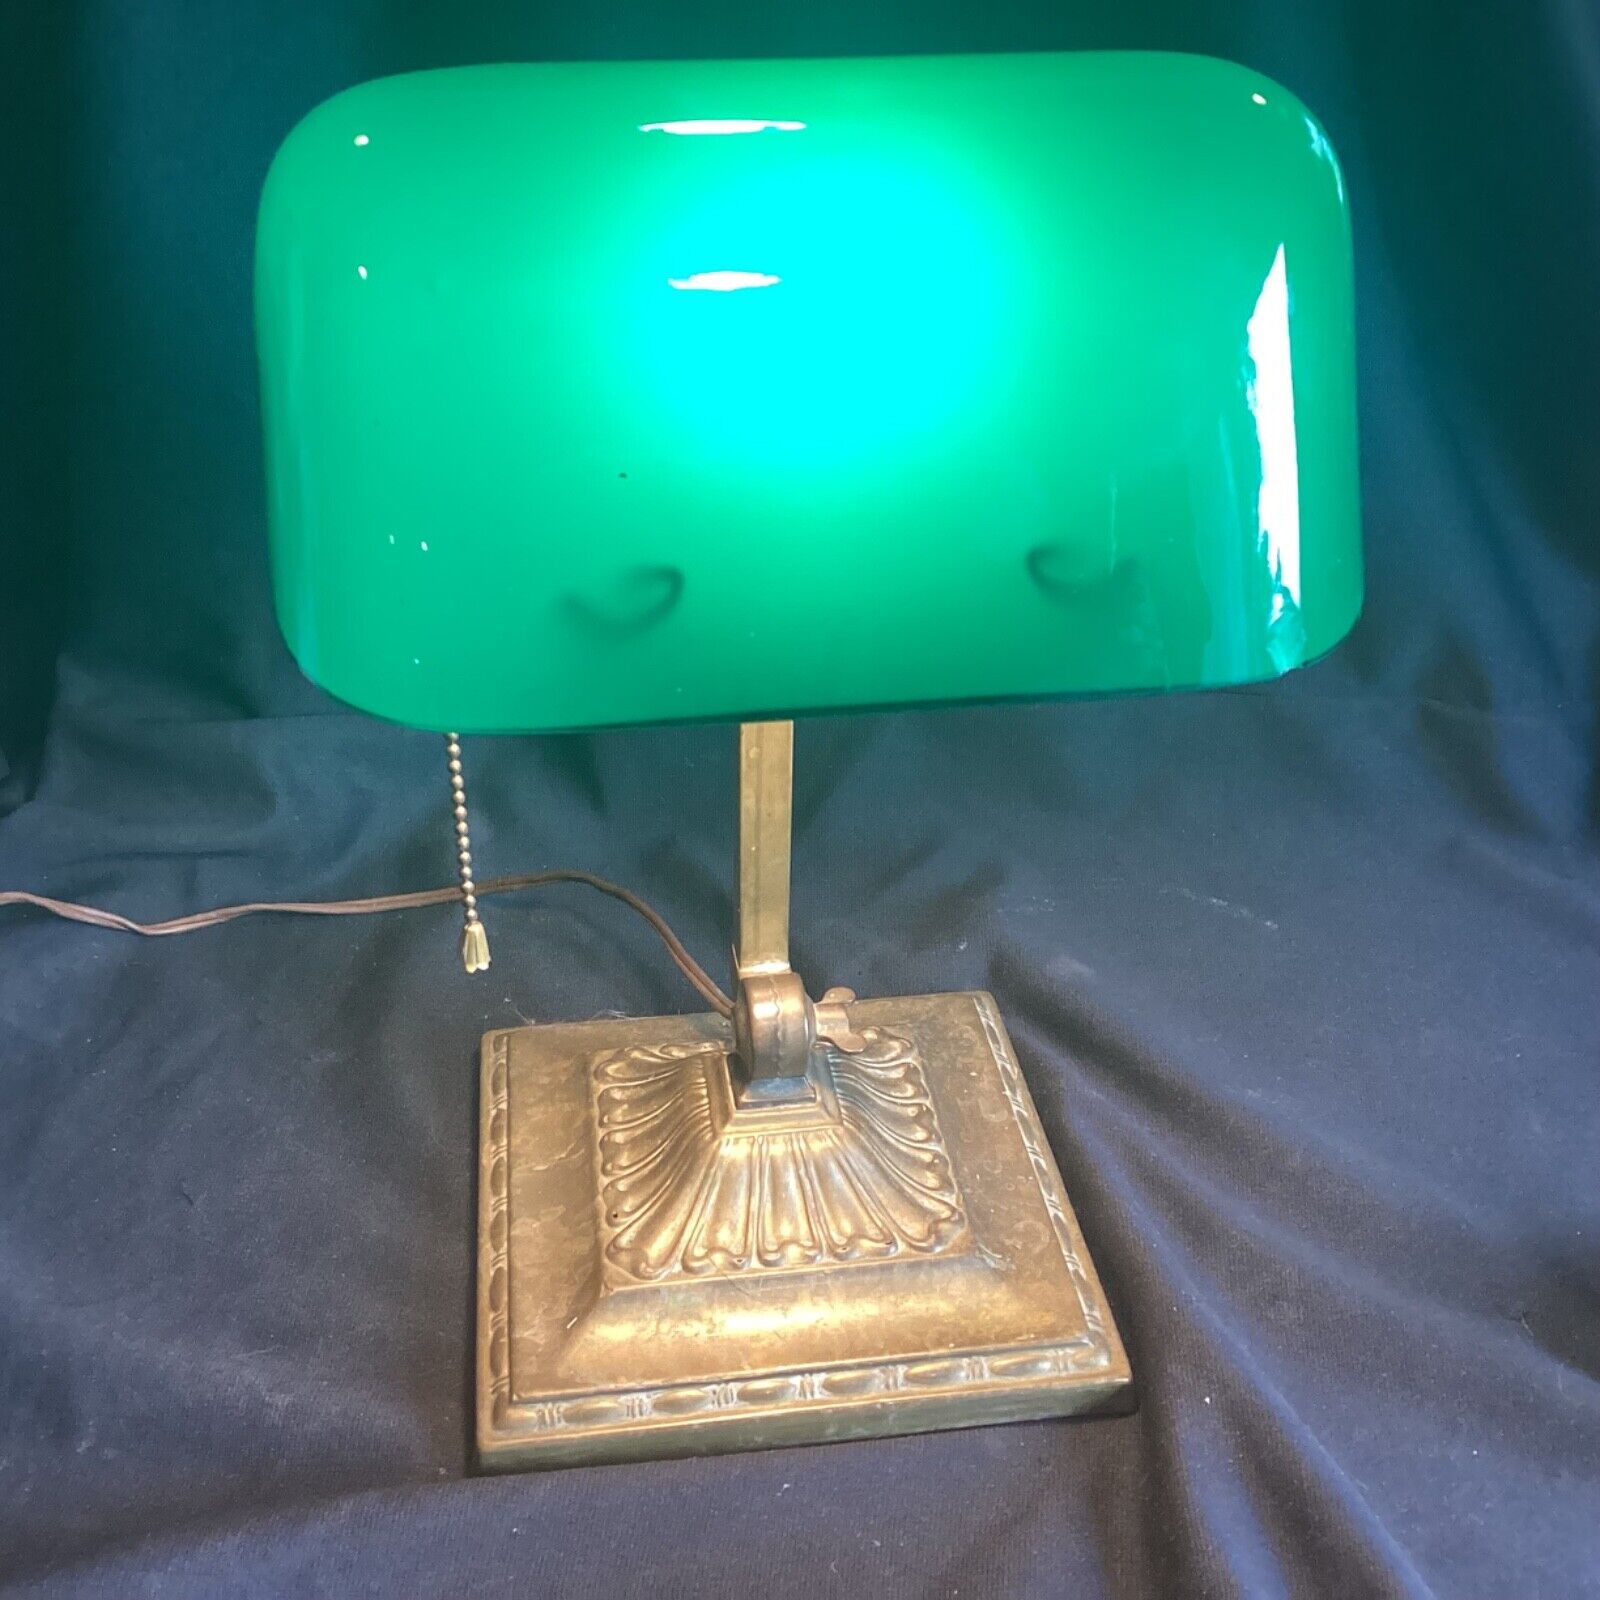 Antique Art Deco Emeralite Bankers Desk Lamp #8734 Green Cased Glass Shade